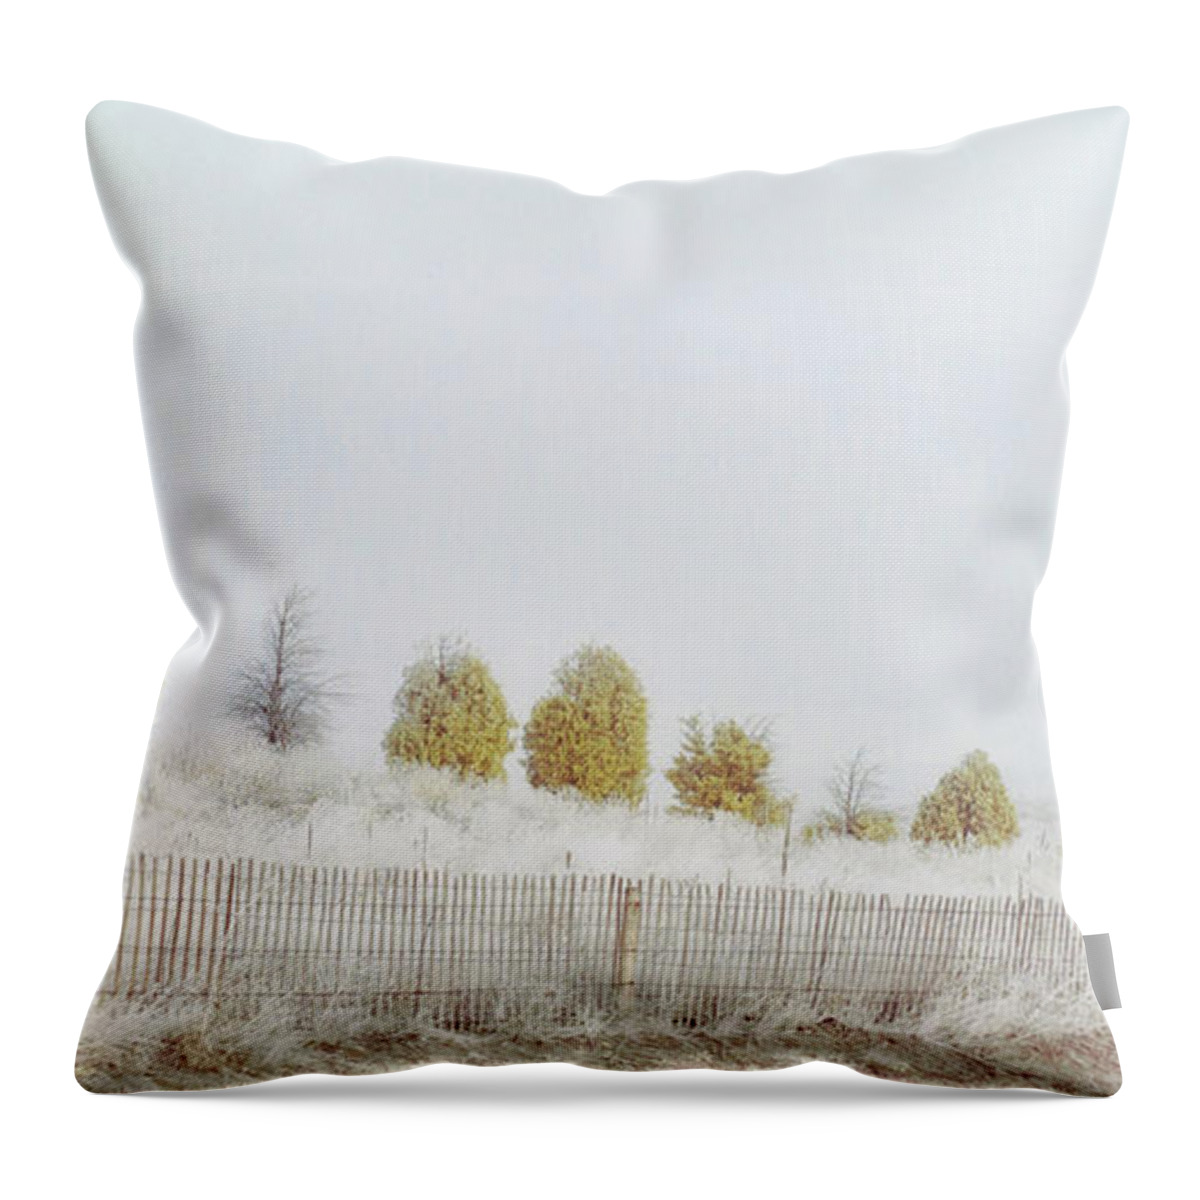 Infrared Throw Pillow featuring the photograph Morning Walk by Jim Cook